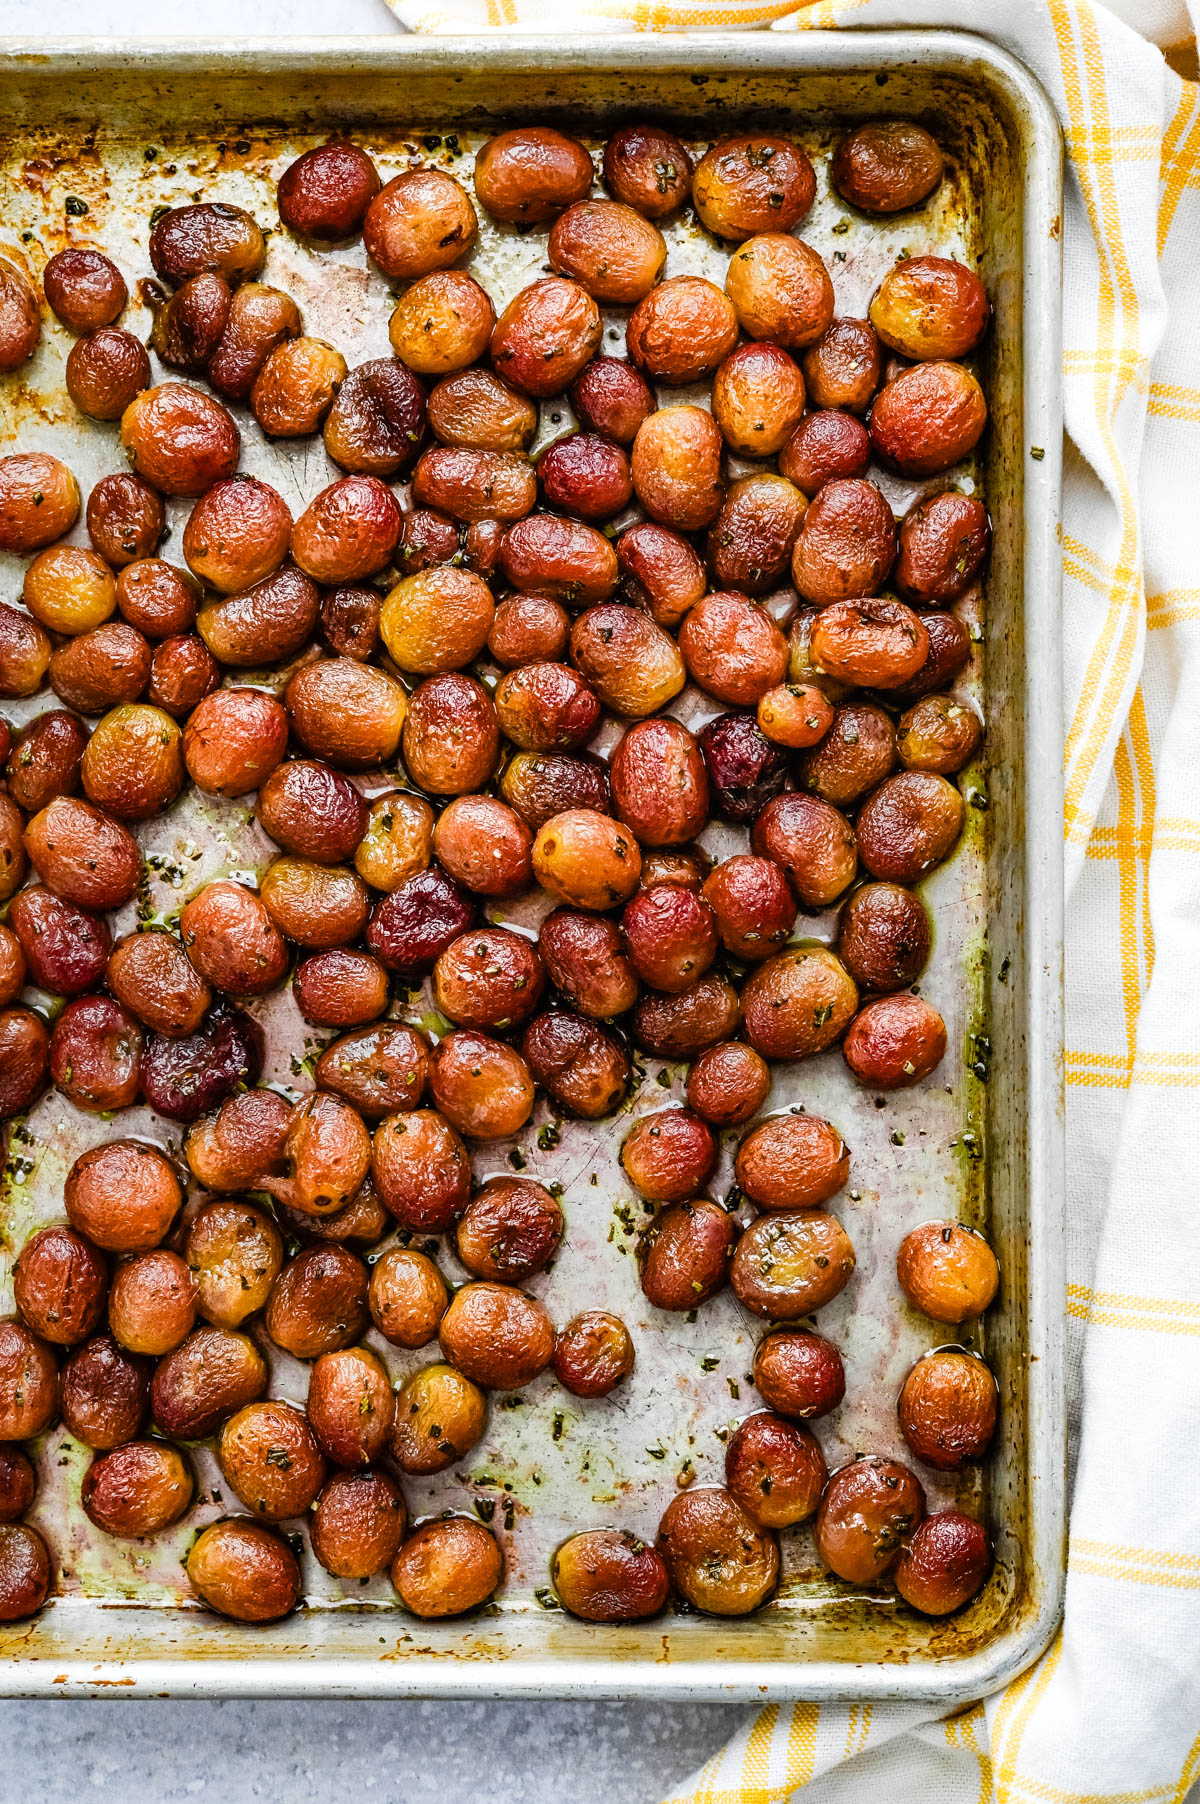 The roasted grapes after they've come out of the oven.